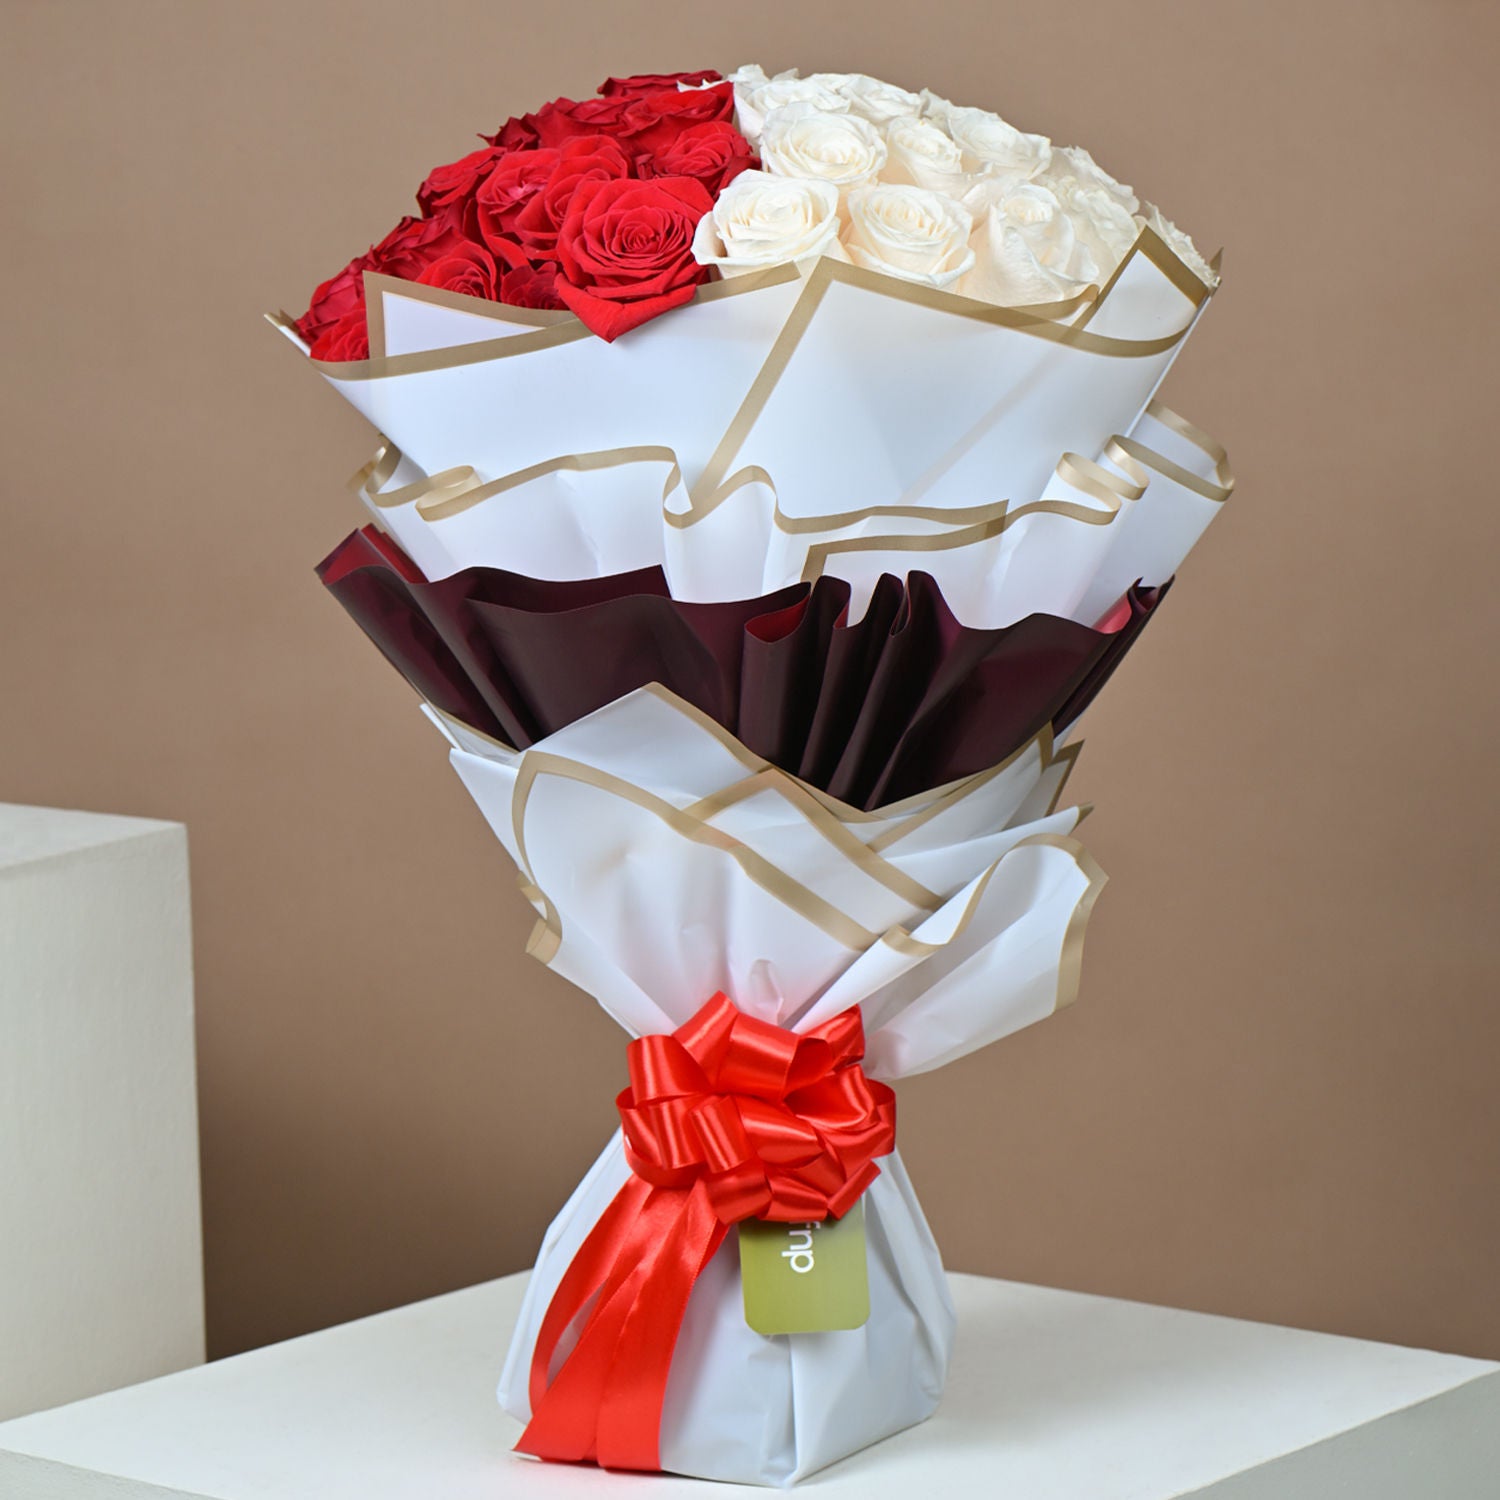 Lovely Red & White Rose Bouquet